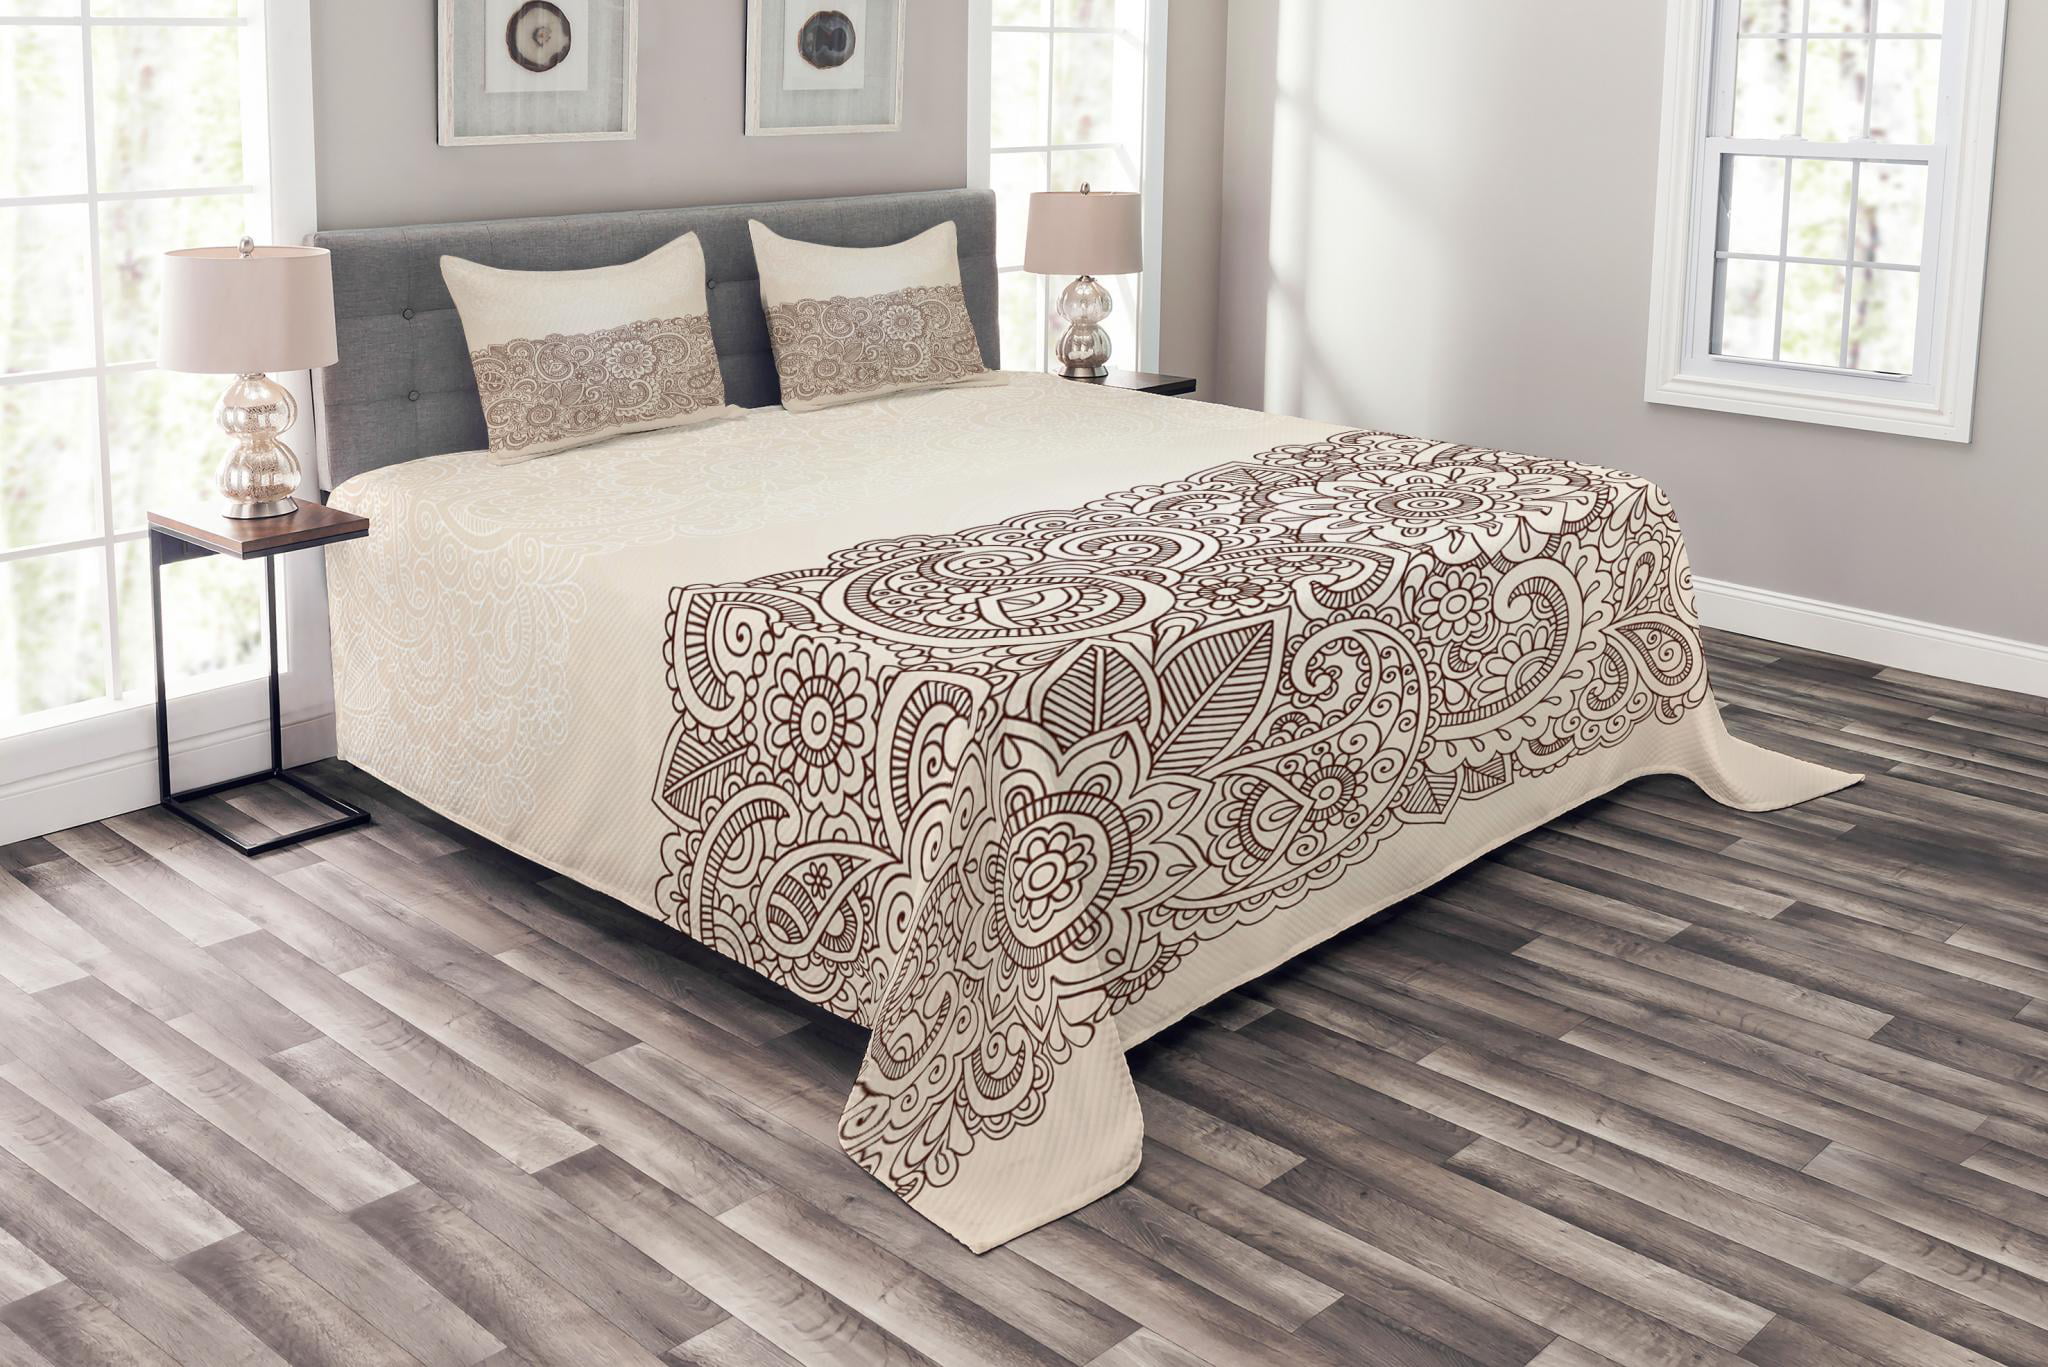 Details about   3 Piece Queen King Quilt Set Paisley Printed Bedspread Coverlets Bedding Set 